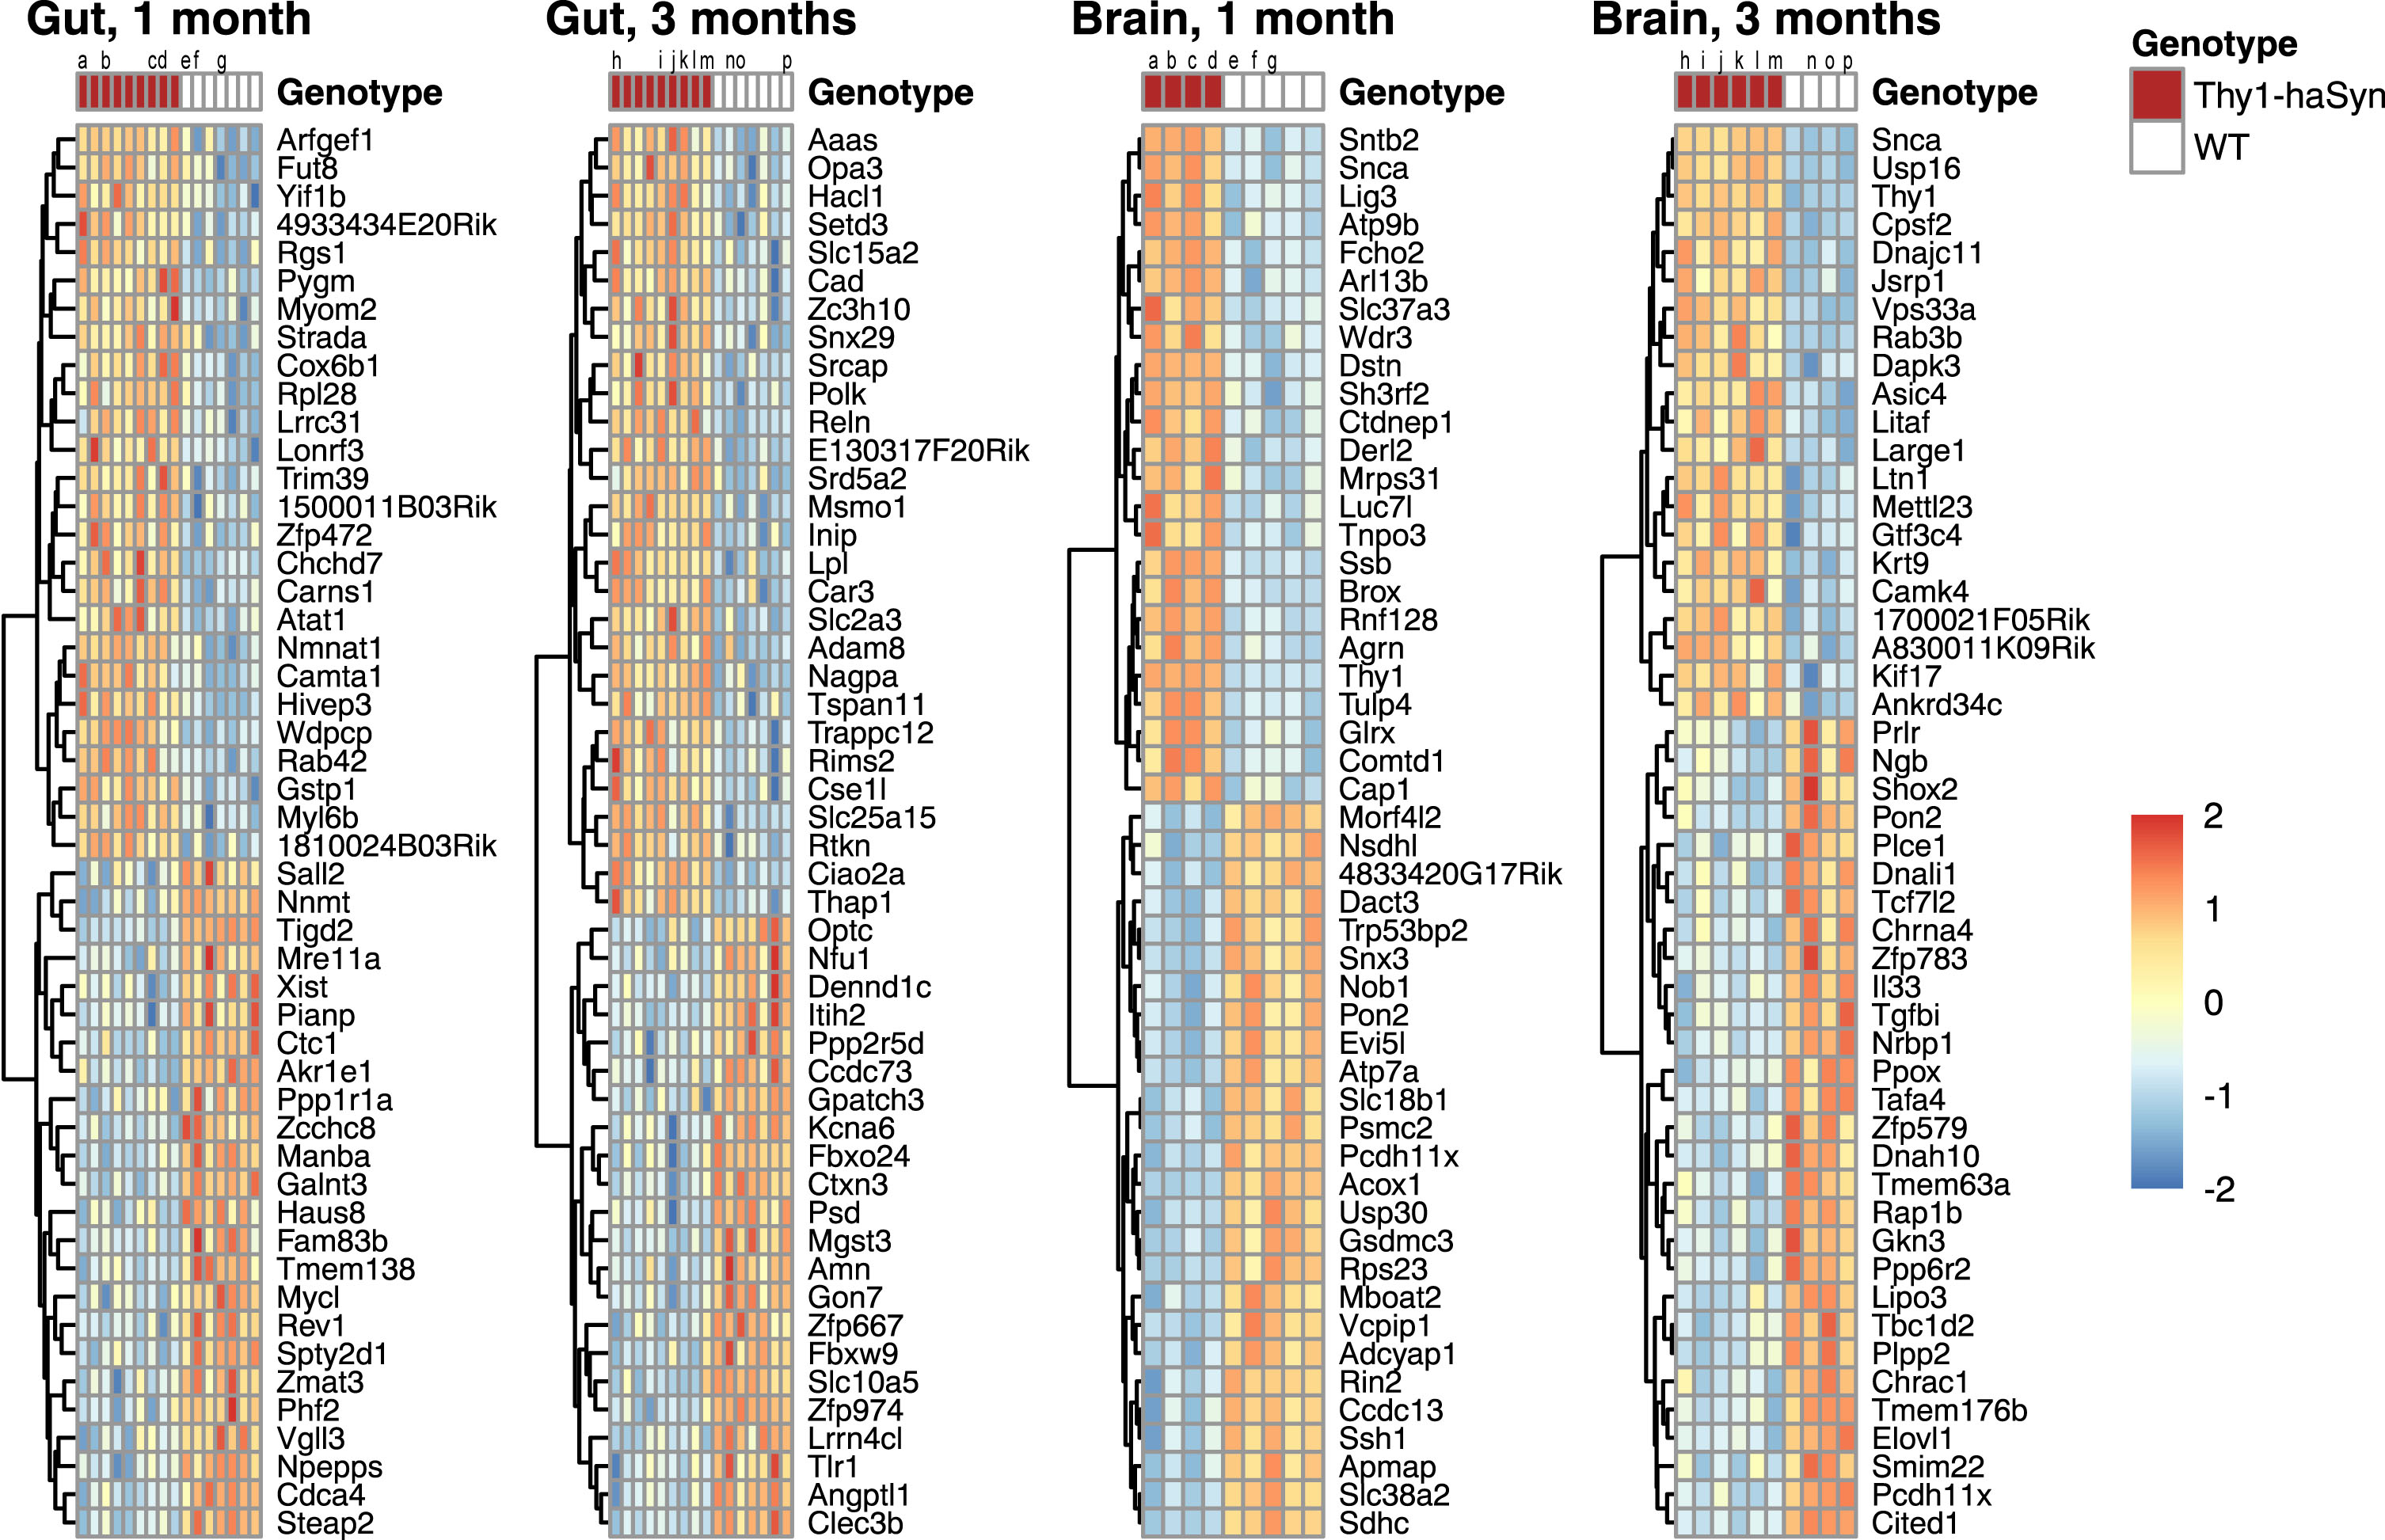 Top differentially expressed genes. Heat map of scaled expression for the top 50 genes with NCBI IDs in each tissue and time point. Rows are clustered by distance. Lower case letters identify individual animals for which matched (gut, brain) samples are present. All differentially expressed genes are provided in a supplement. Samples sizes are shown in Table 1. Thy1-haSyn, alpha-synuclein overexpressing; WT, wild type.